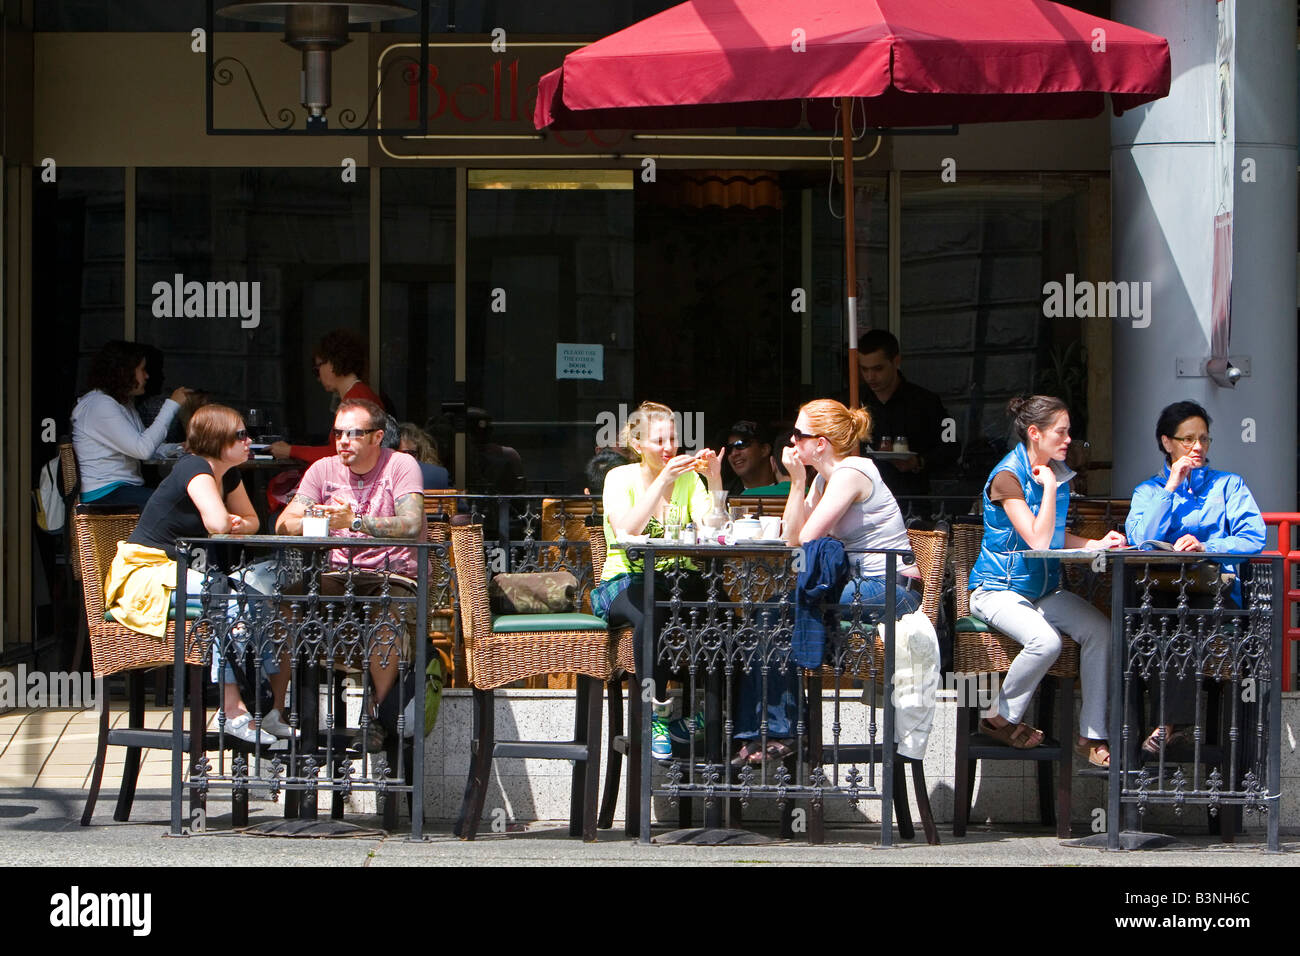 People dine at a sidewalk cafe in Vancouver British Columbia Canada Stock Photo